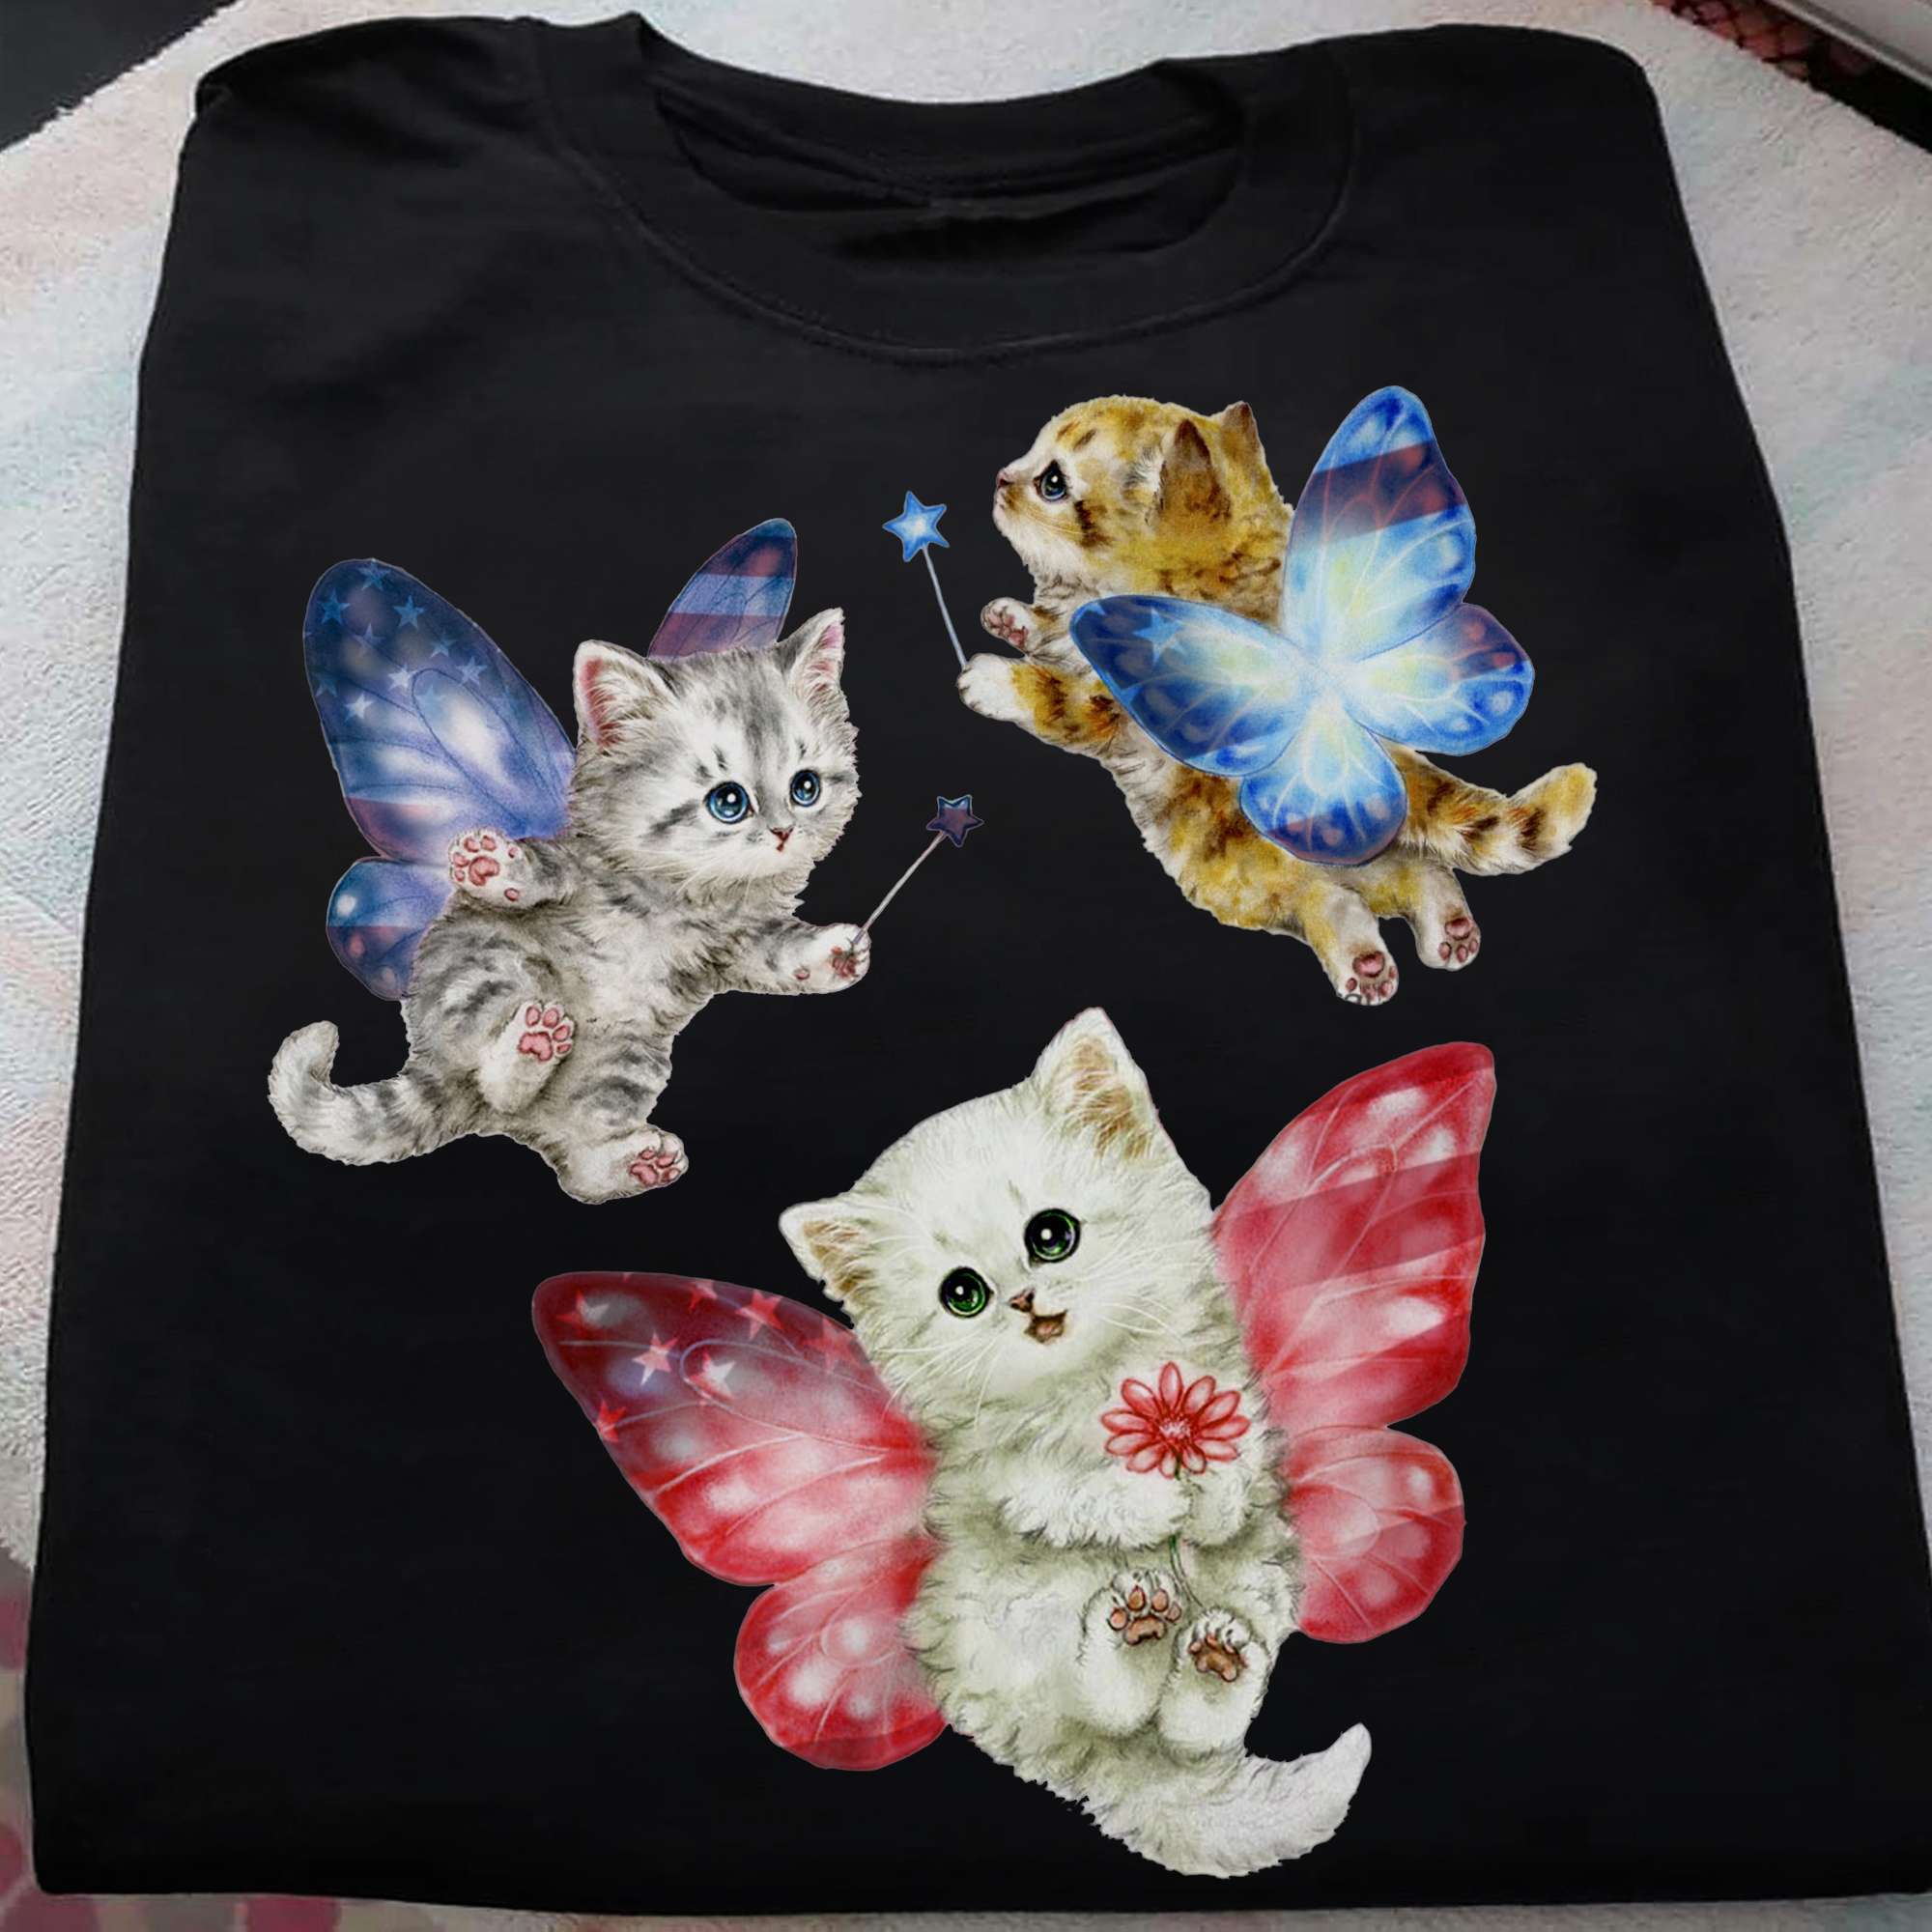 Kitty fairy cat - Cat with wings, Kitty cat with wings graphic T-shirt